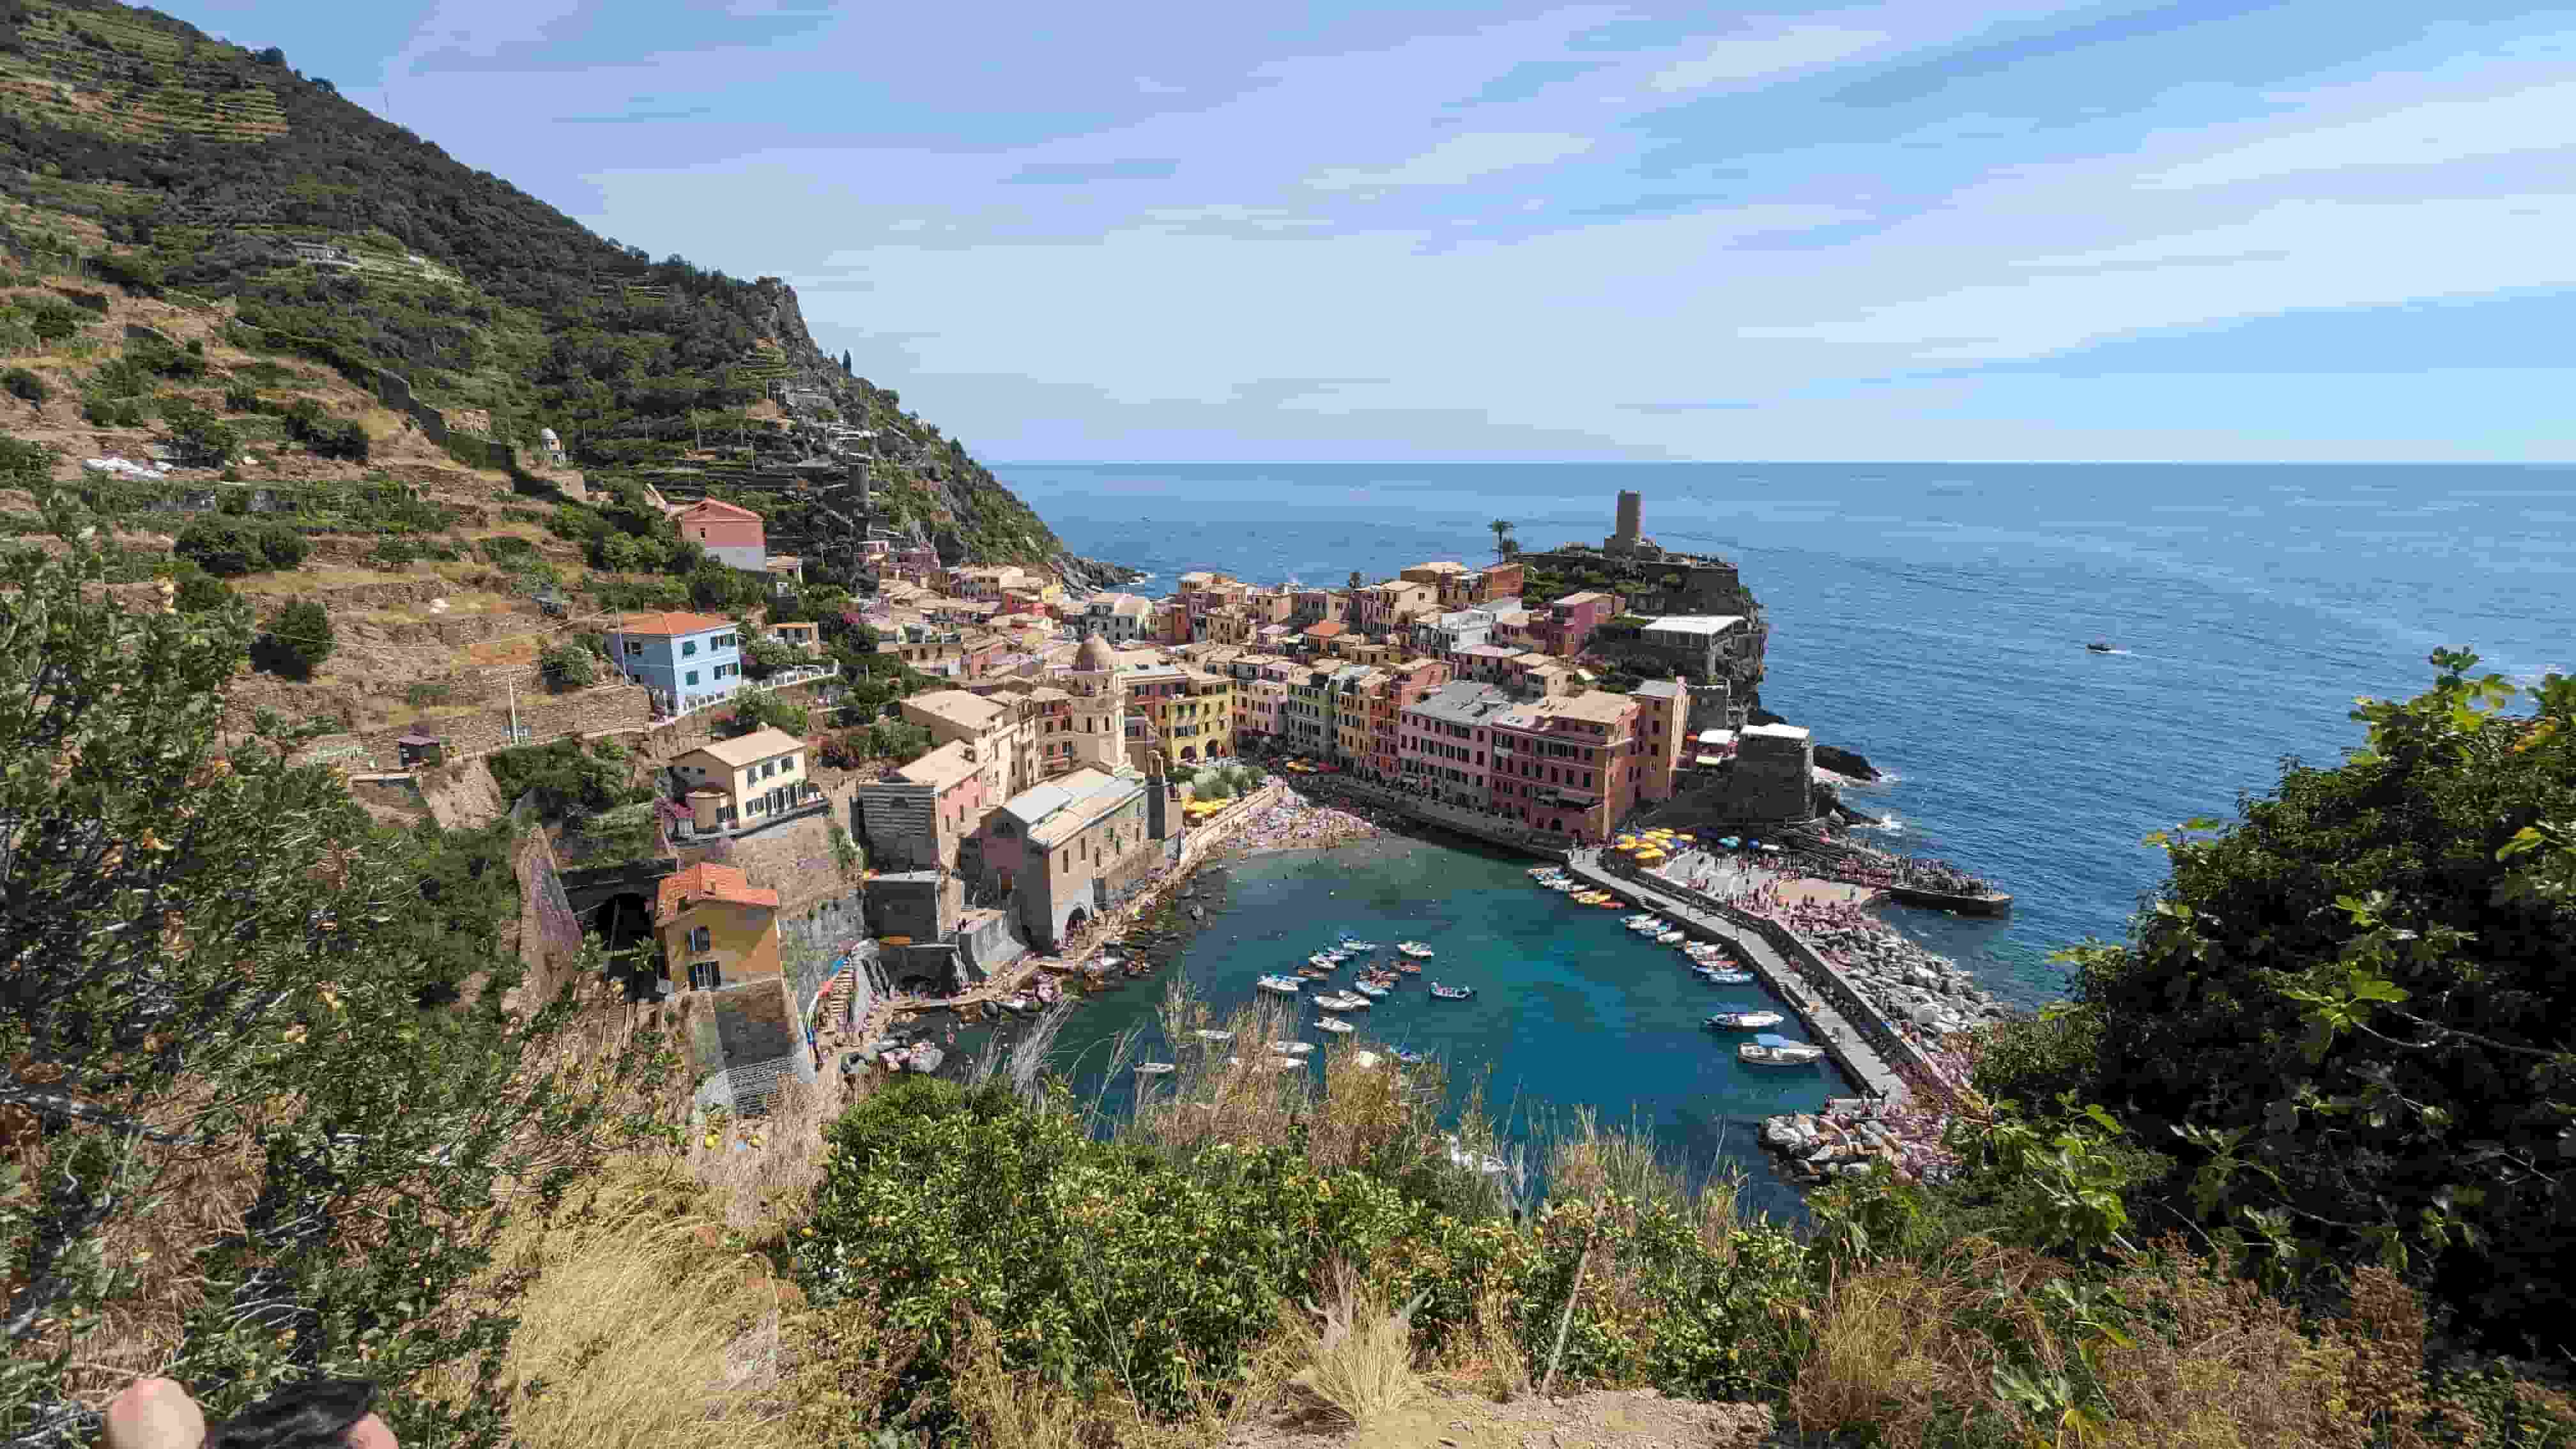 A picture of a village in Cinque Terre, Italy